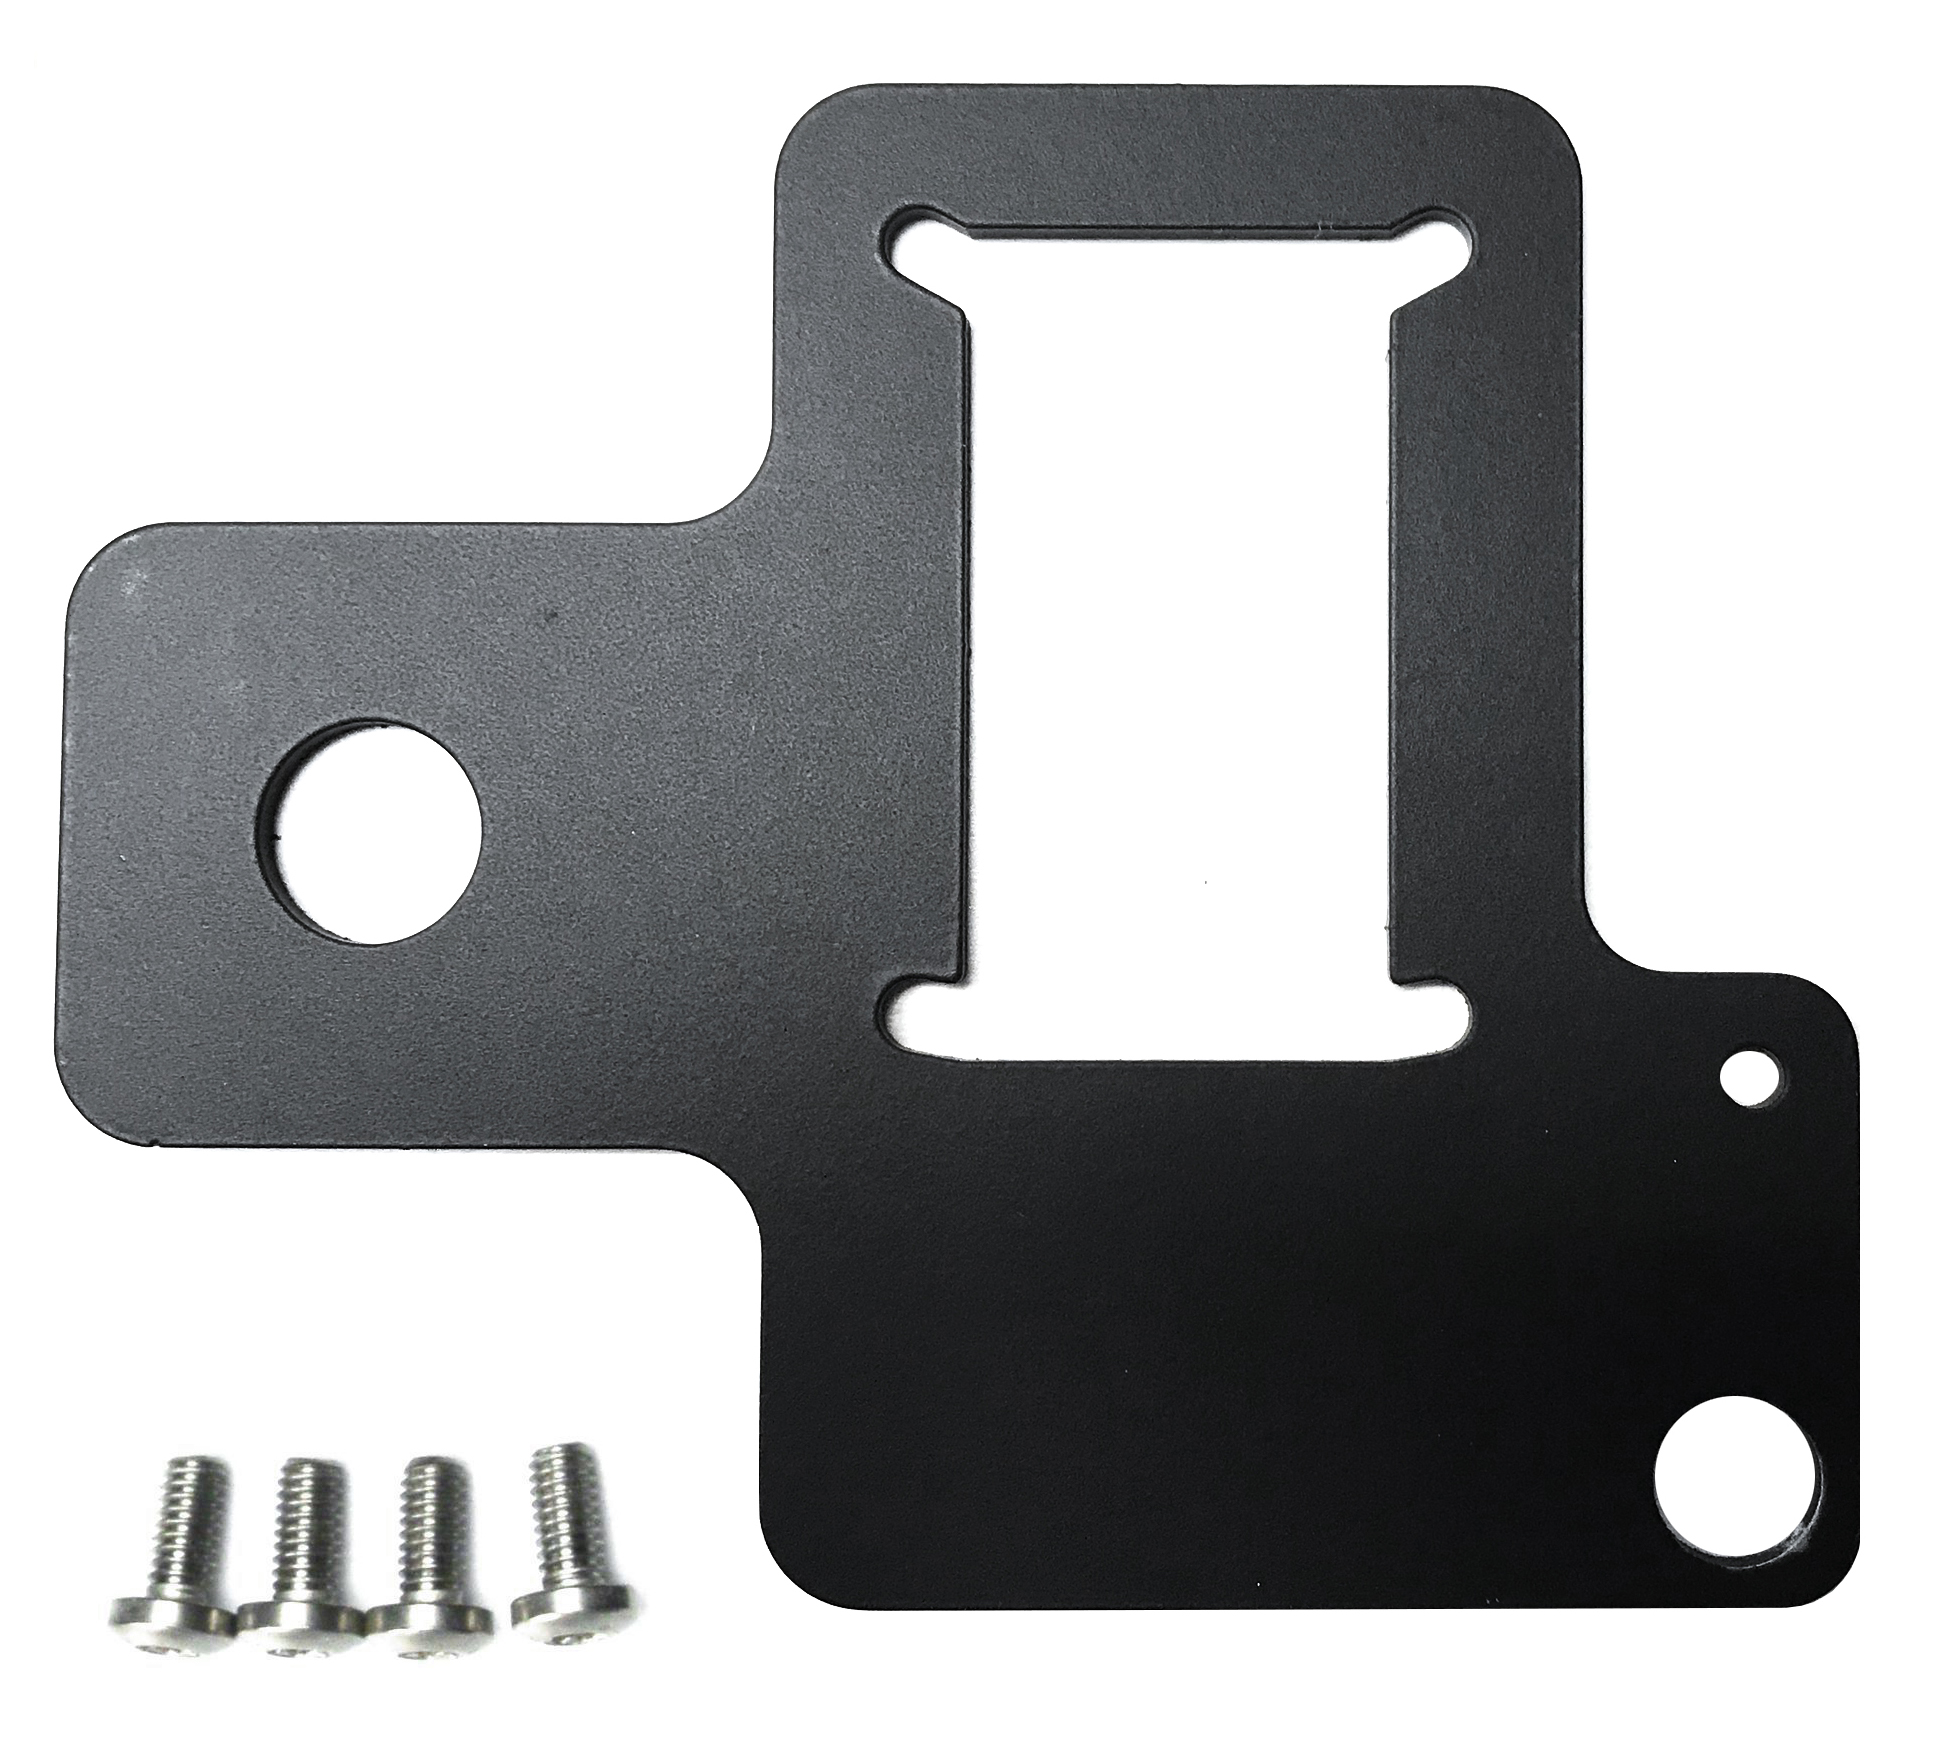 5975 - Multiverse Node Mounting Plate with hardware